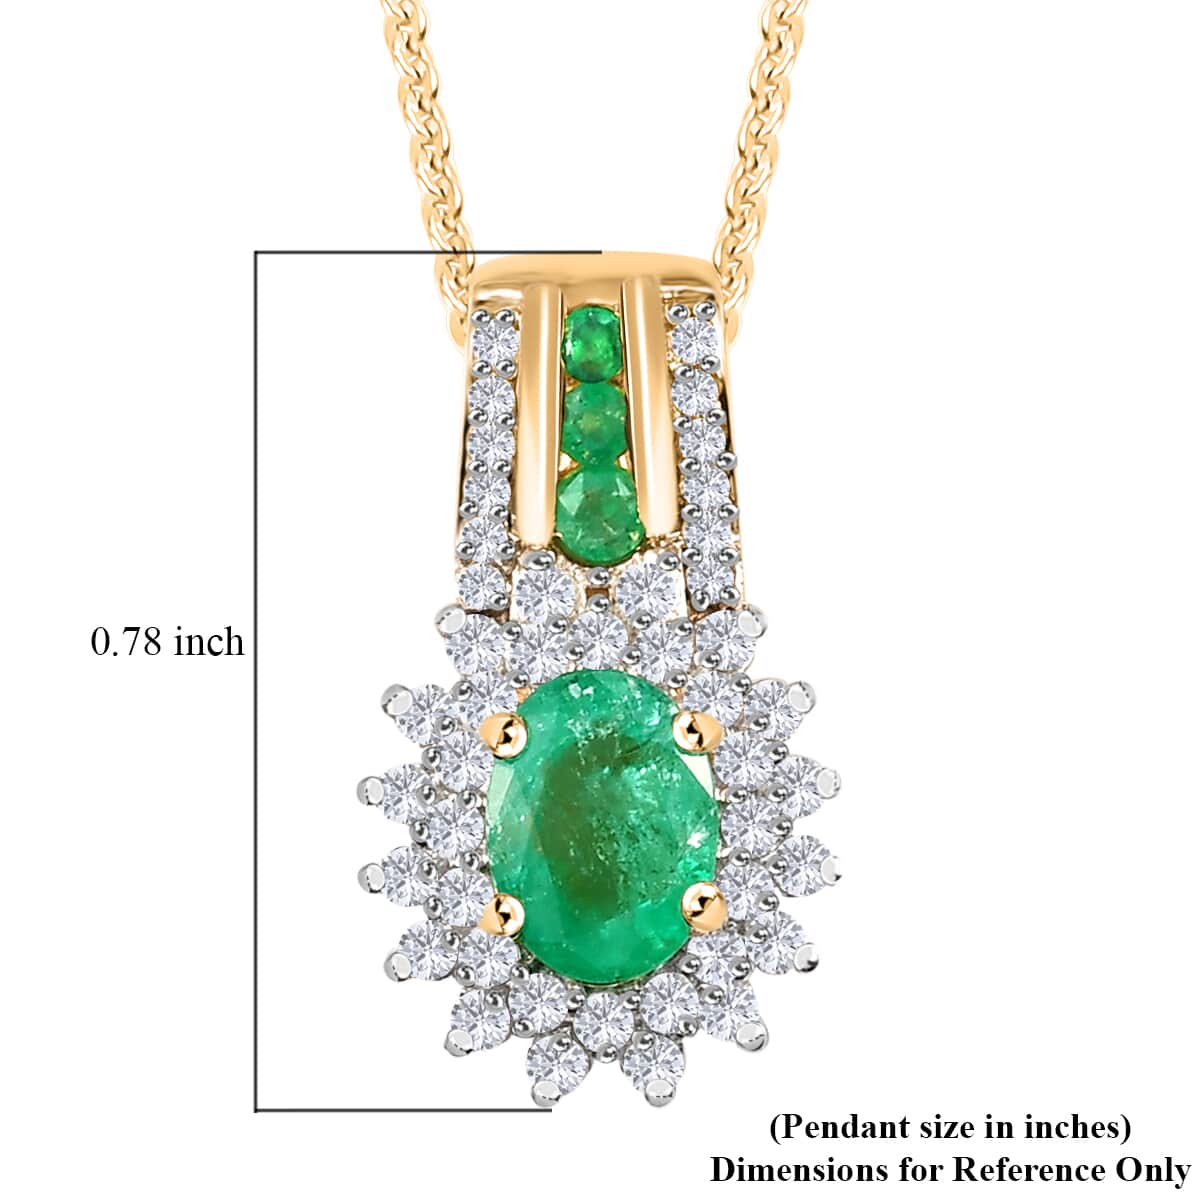 AAA Kagem Zambian Emerald White Zircon Necklace in Vermeil Yellow Gold Plated Sterling Silver,Silver Sunburst Necklace,Oval Halo Pendant 1.35 ctw (20 Inches) image number 5